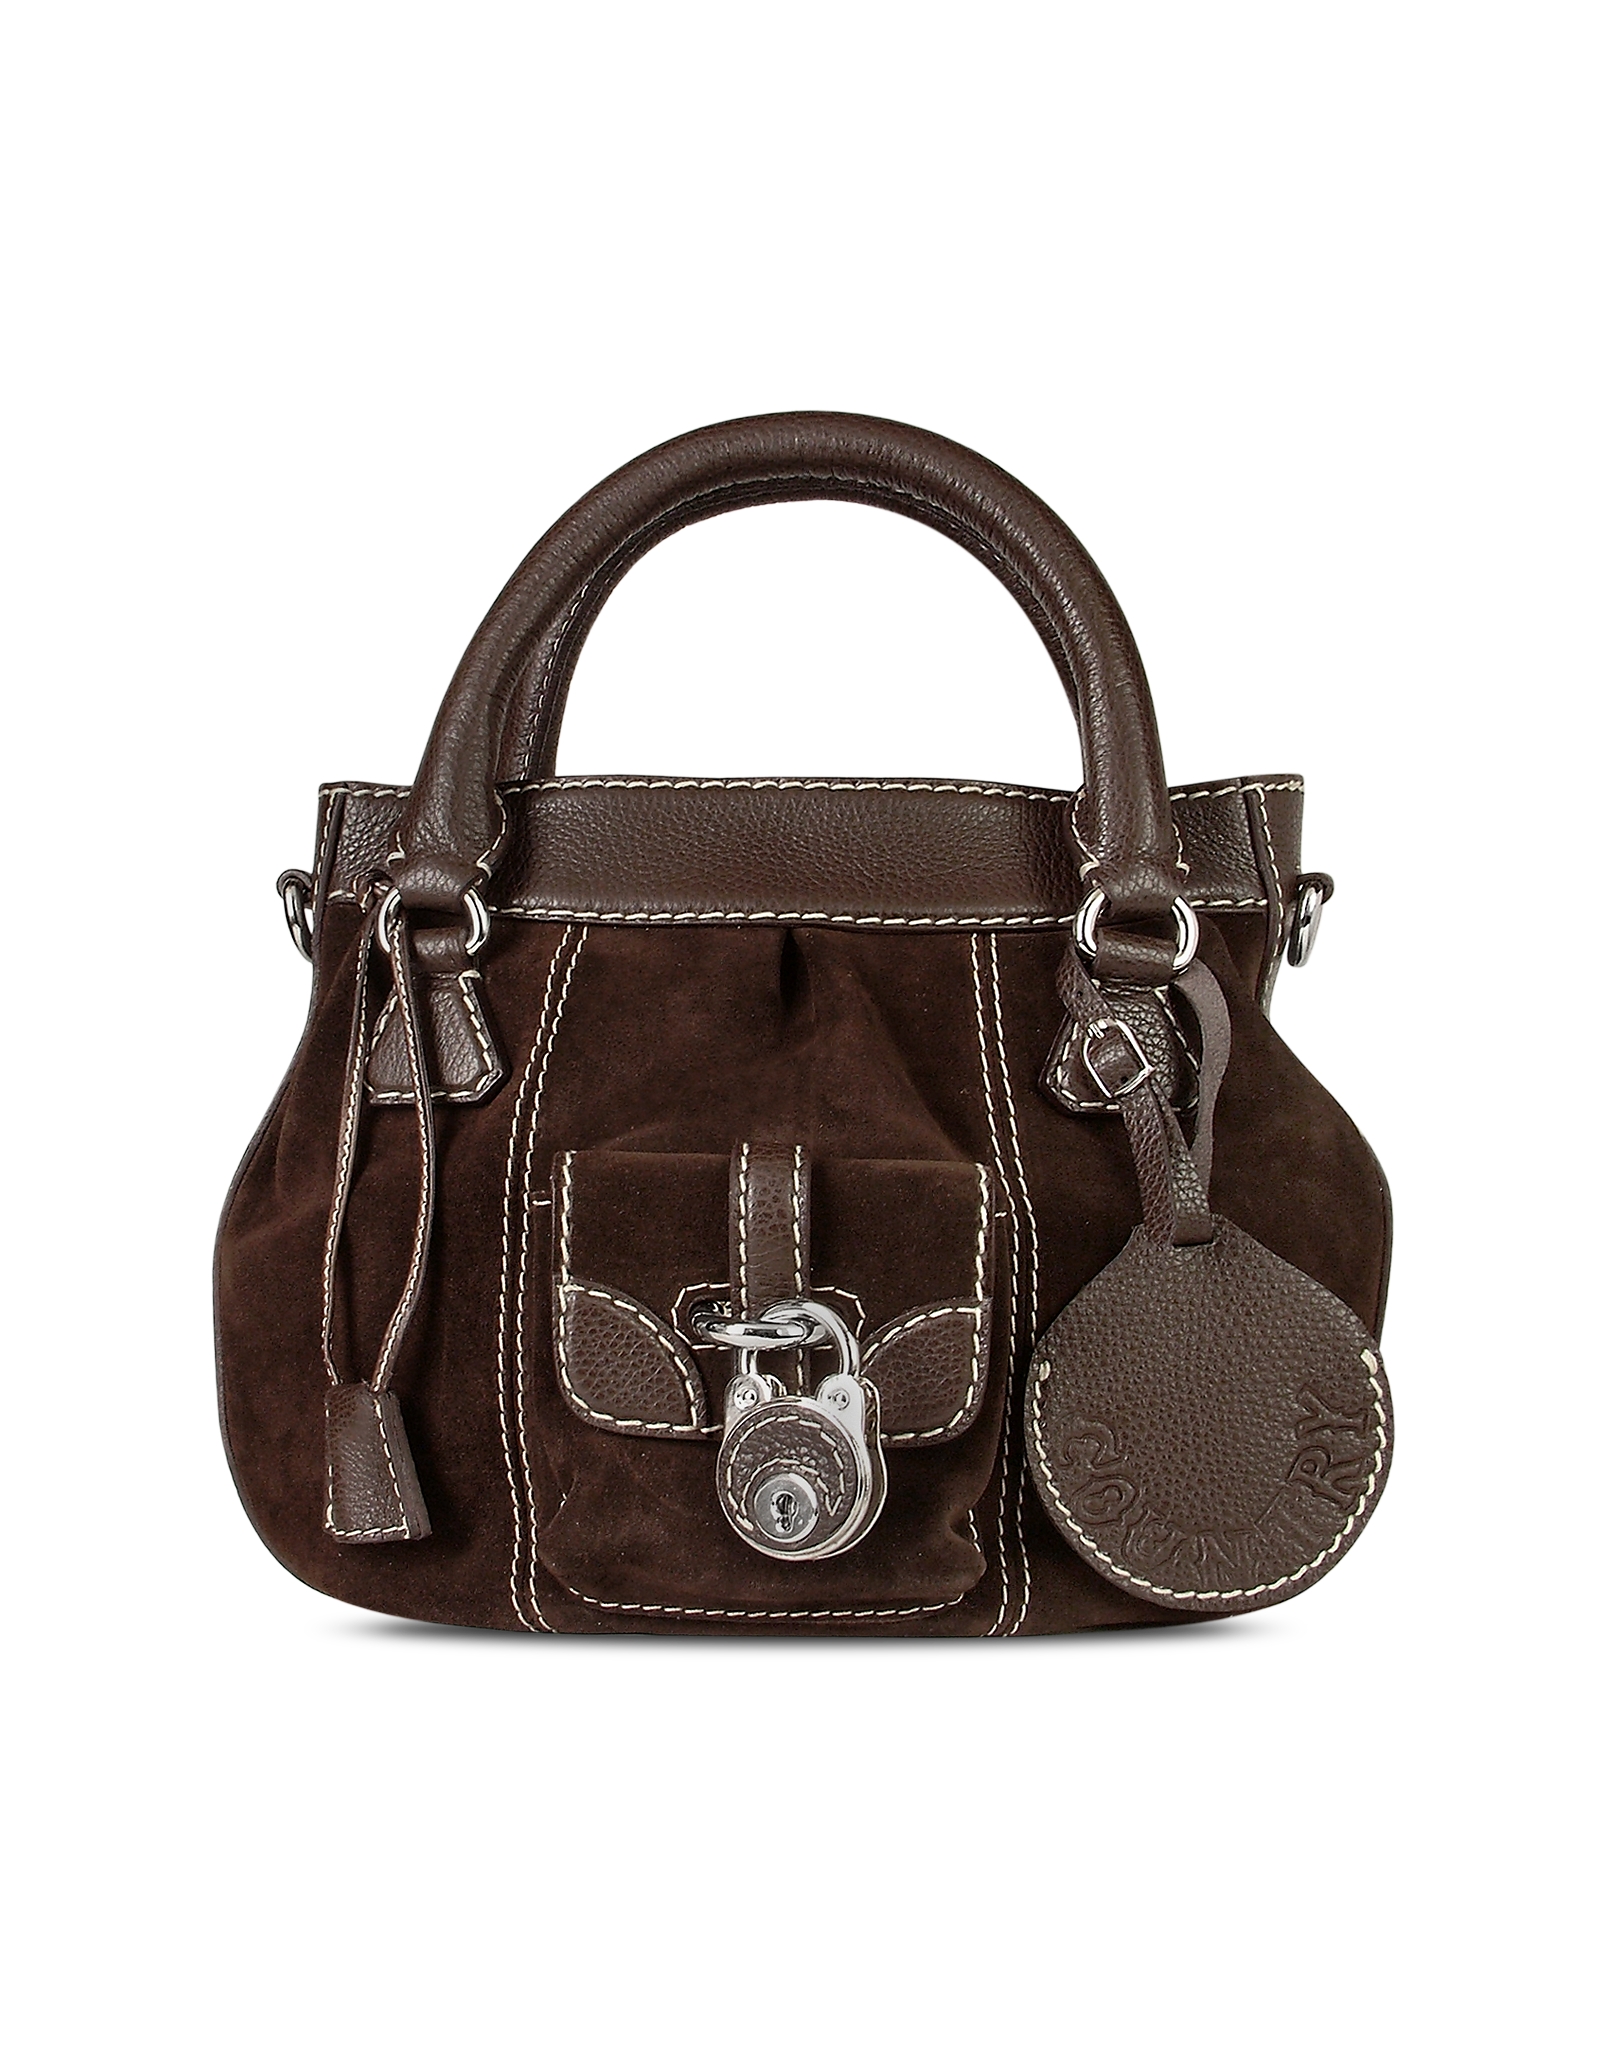 Lyst - Buti Dark Brown Suede And Leather Tote Bag in Brown